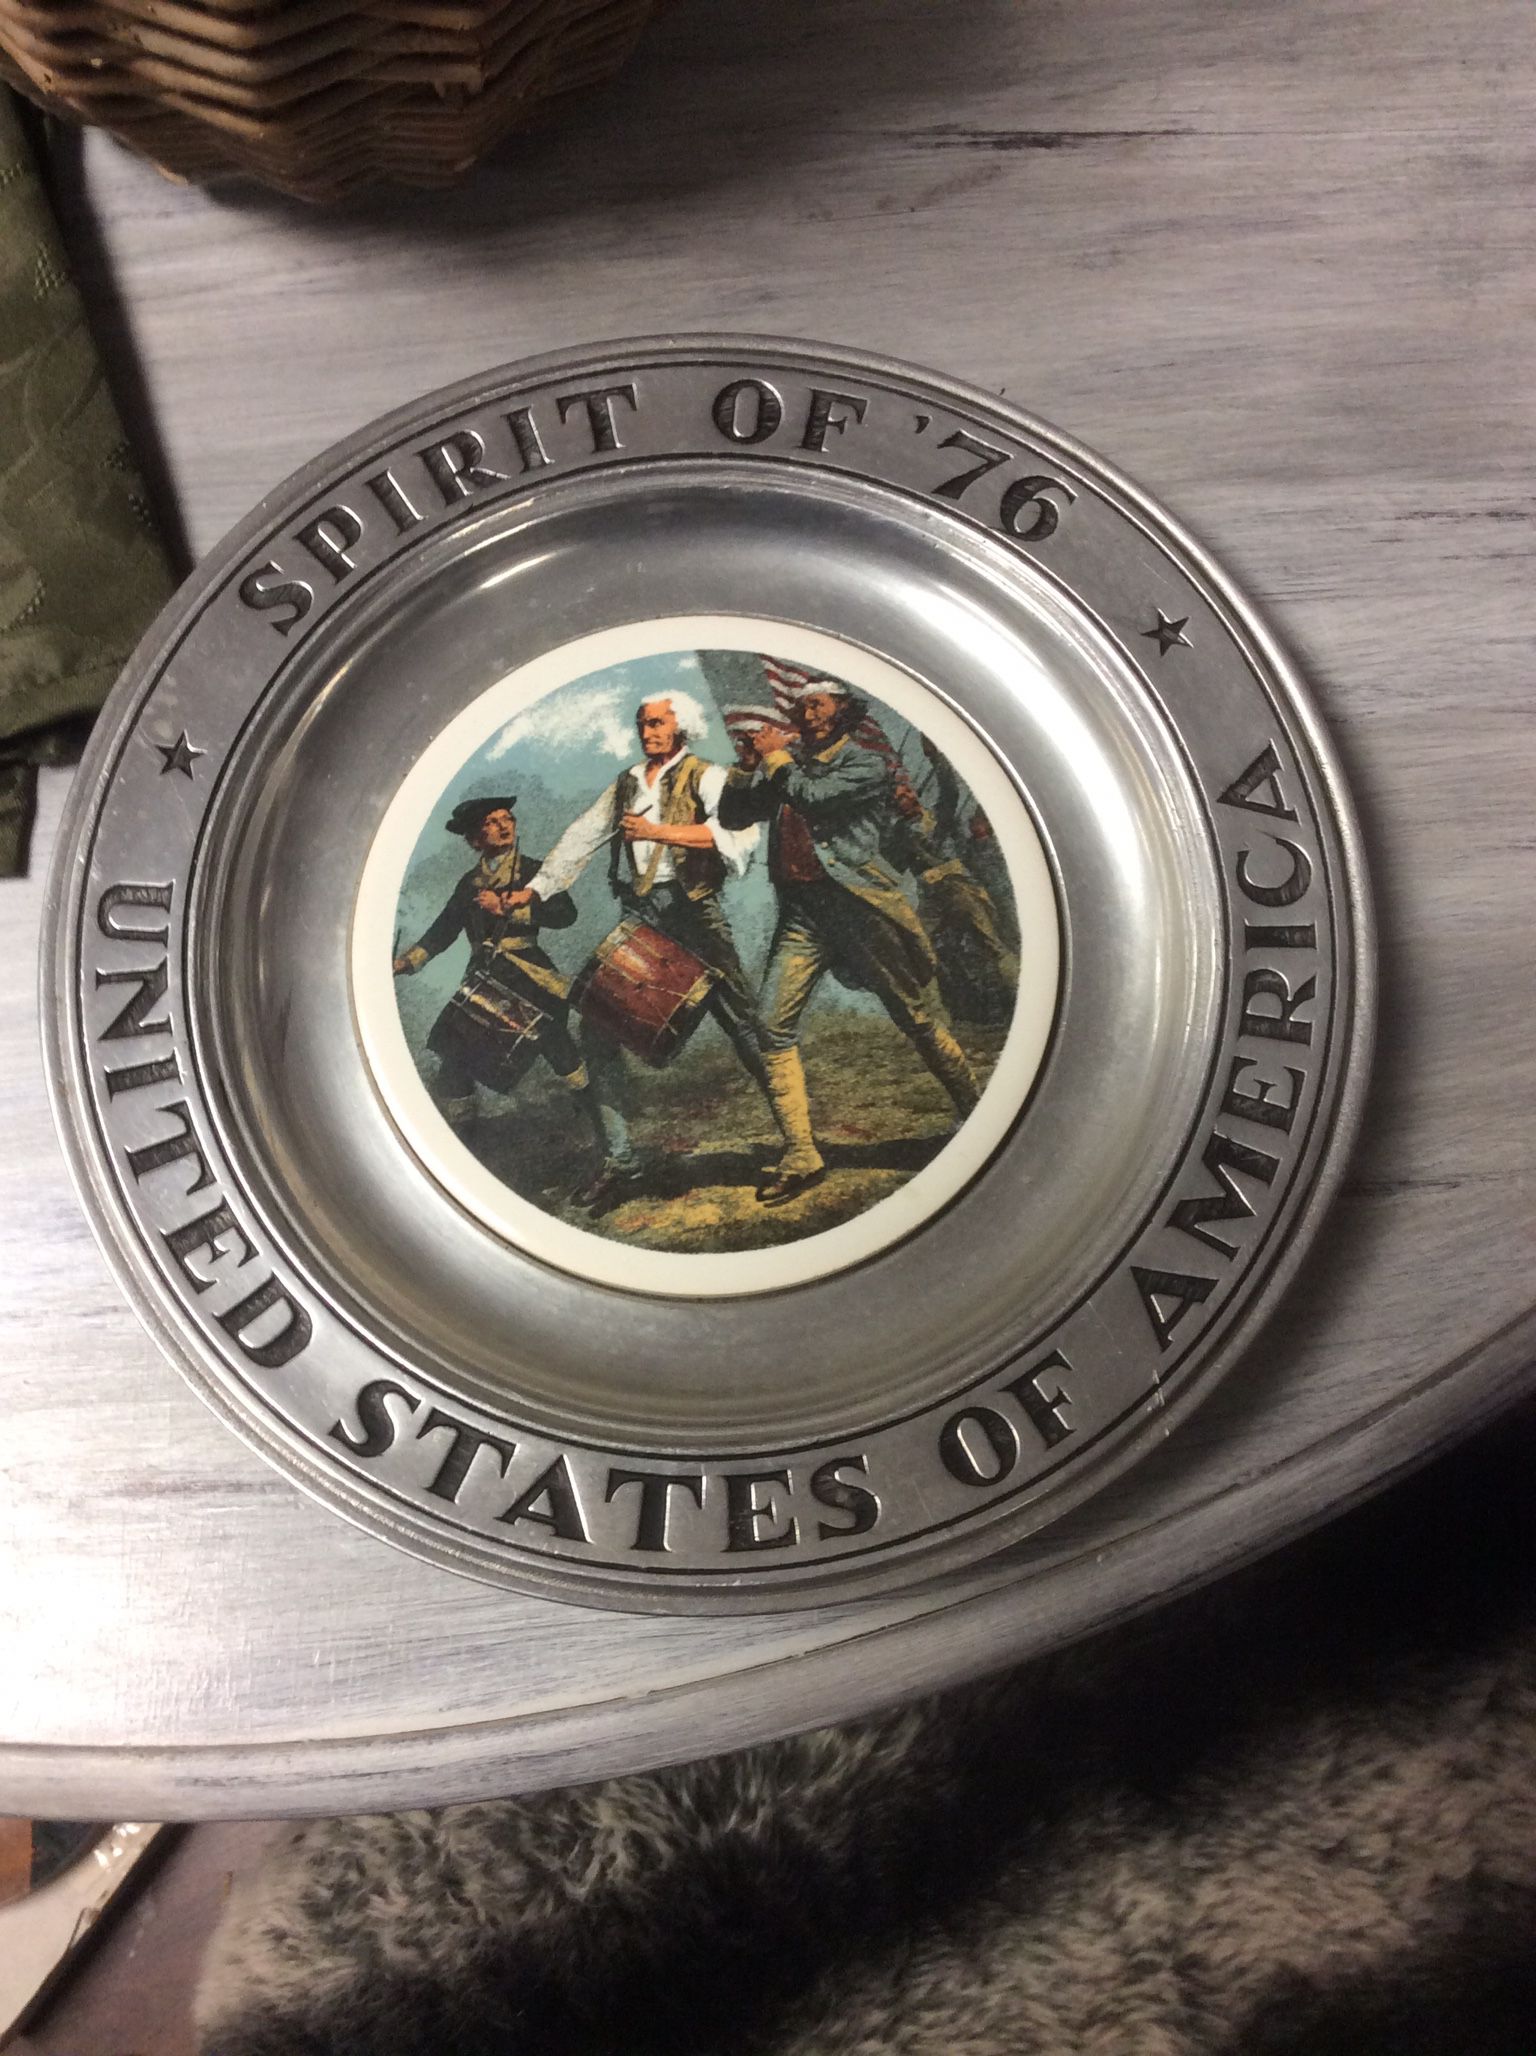 Spirit Of ‘76 United States Of America Pewter Plate